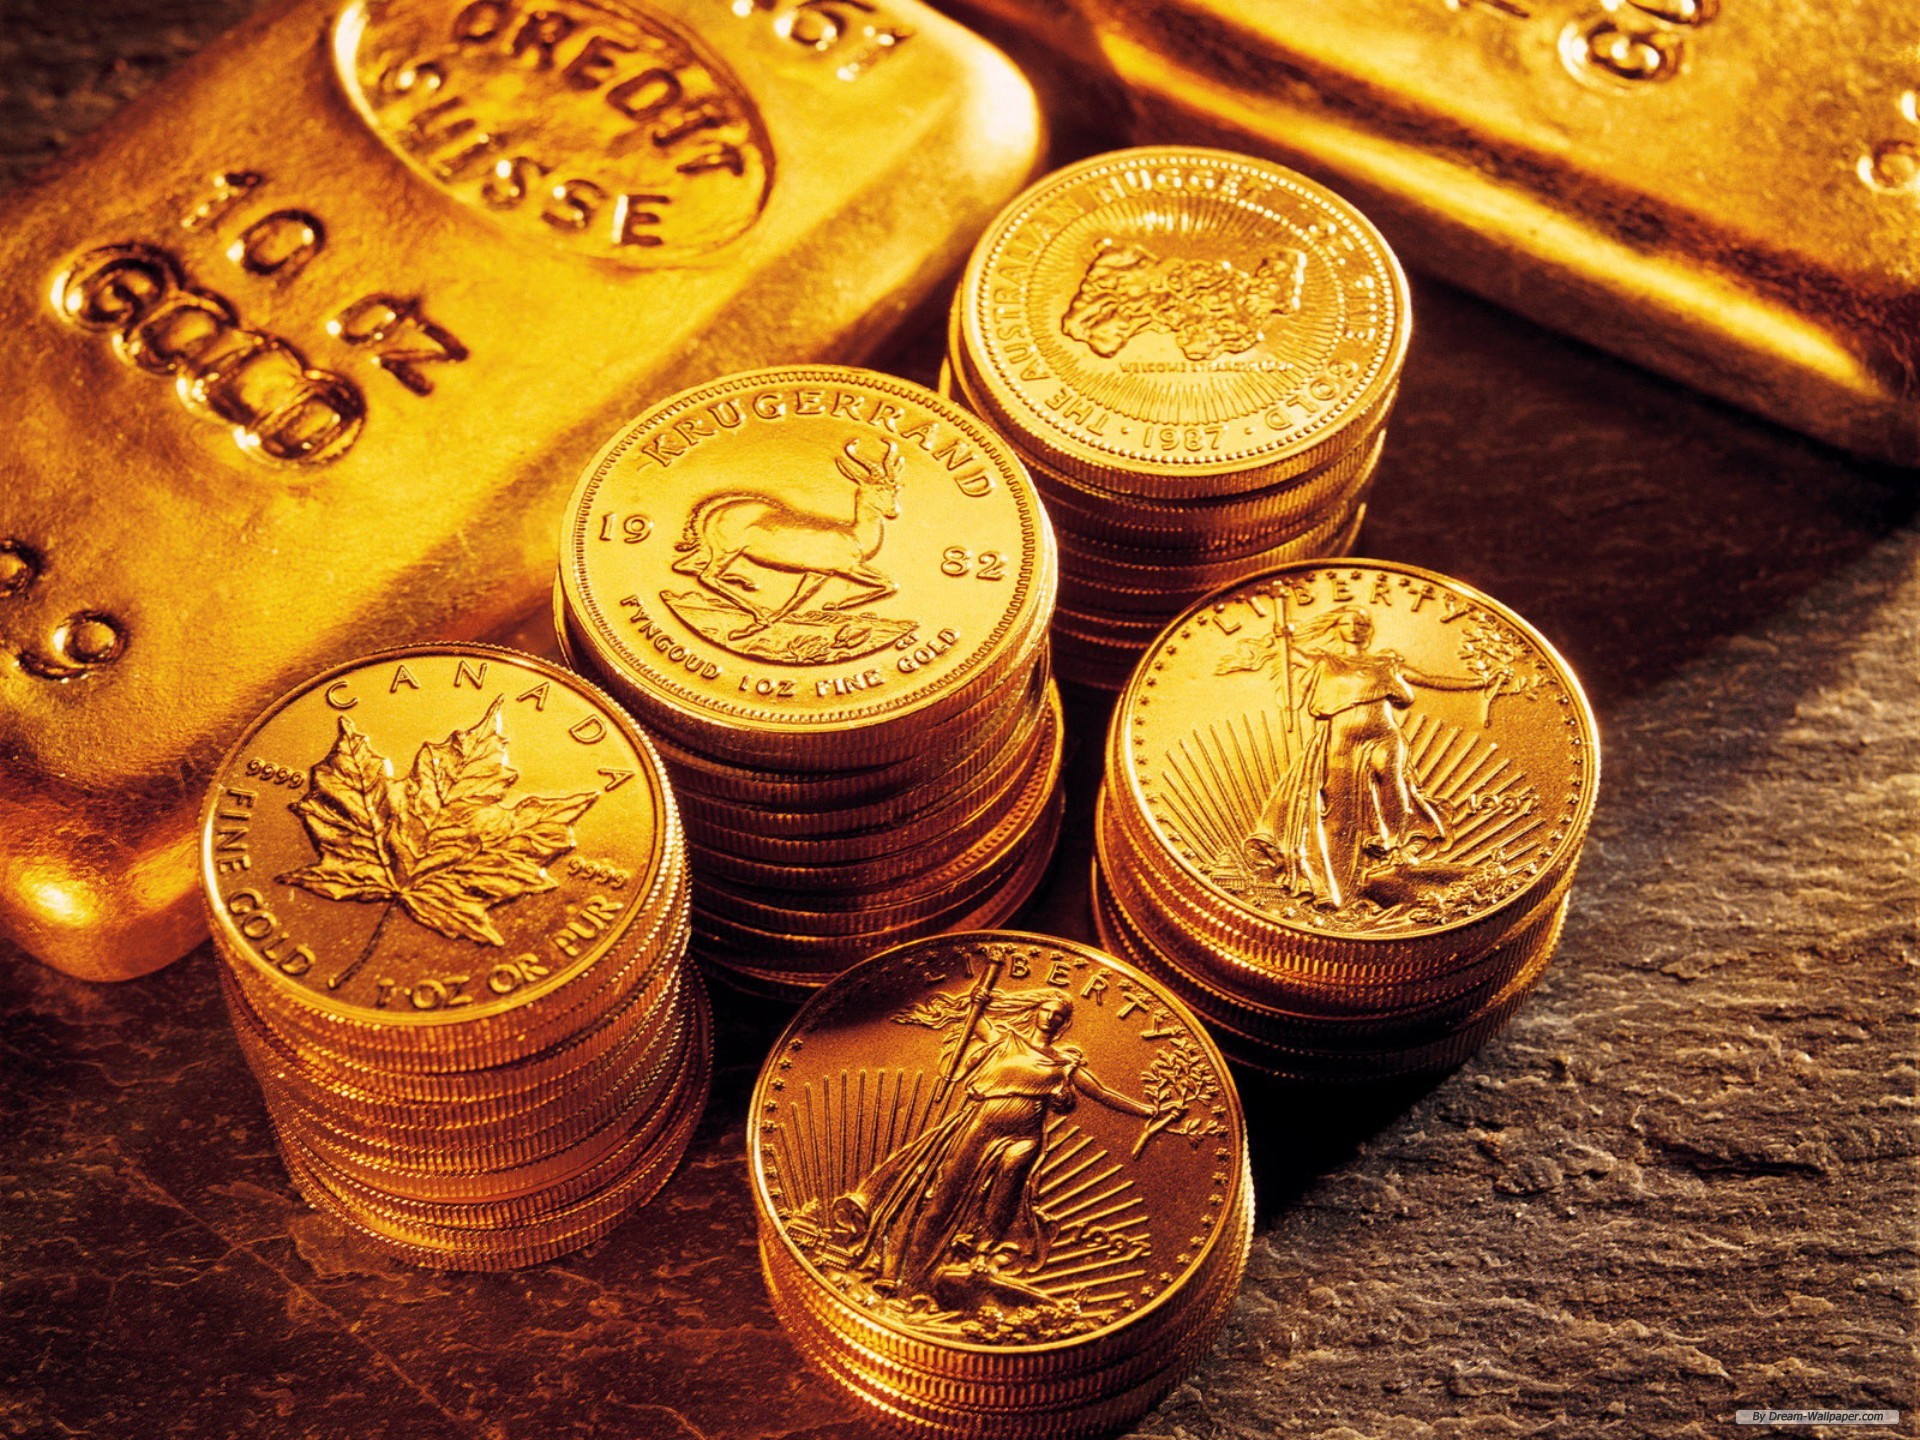 Free Photography Wallpaper - Gold Bar And Coins - HD Wallpaper 